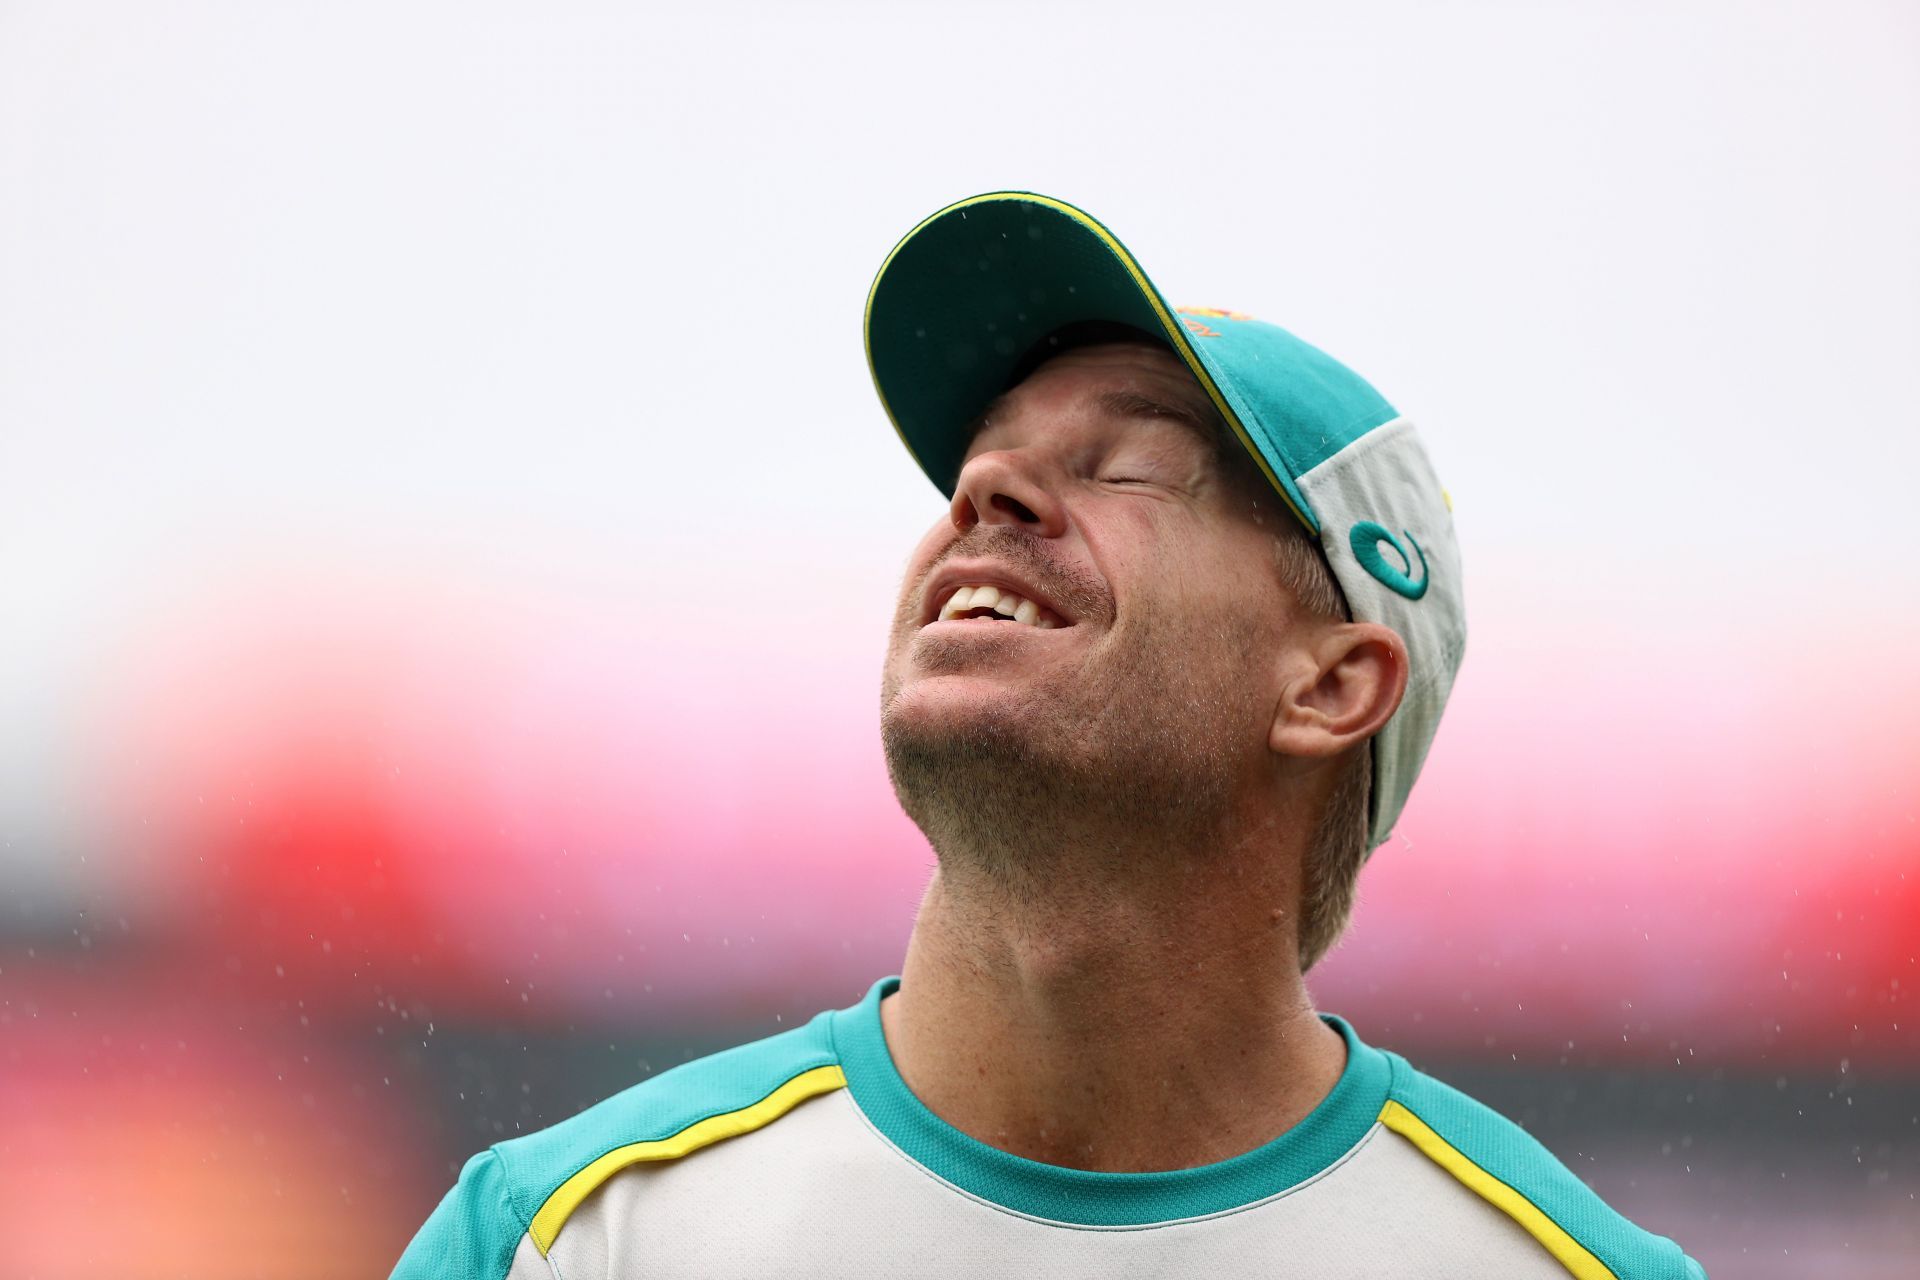 Pakistan vs Australia: David Warner seems a shadow of himself in Asian conditions (Getty Images)